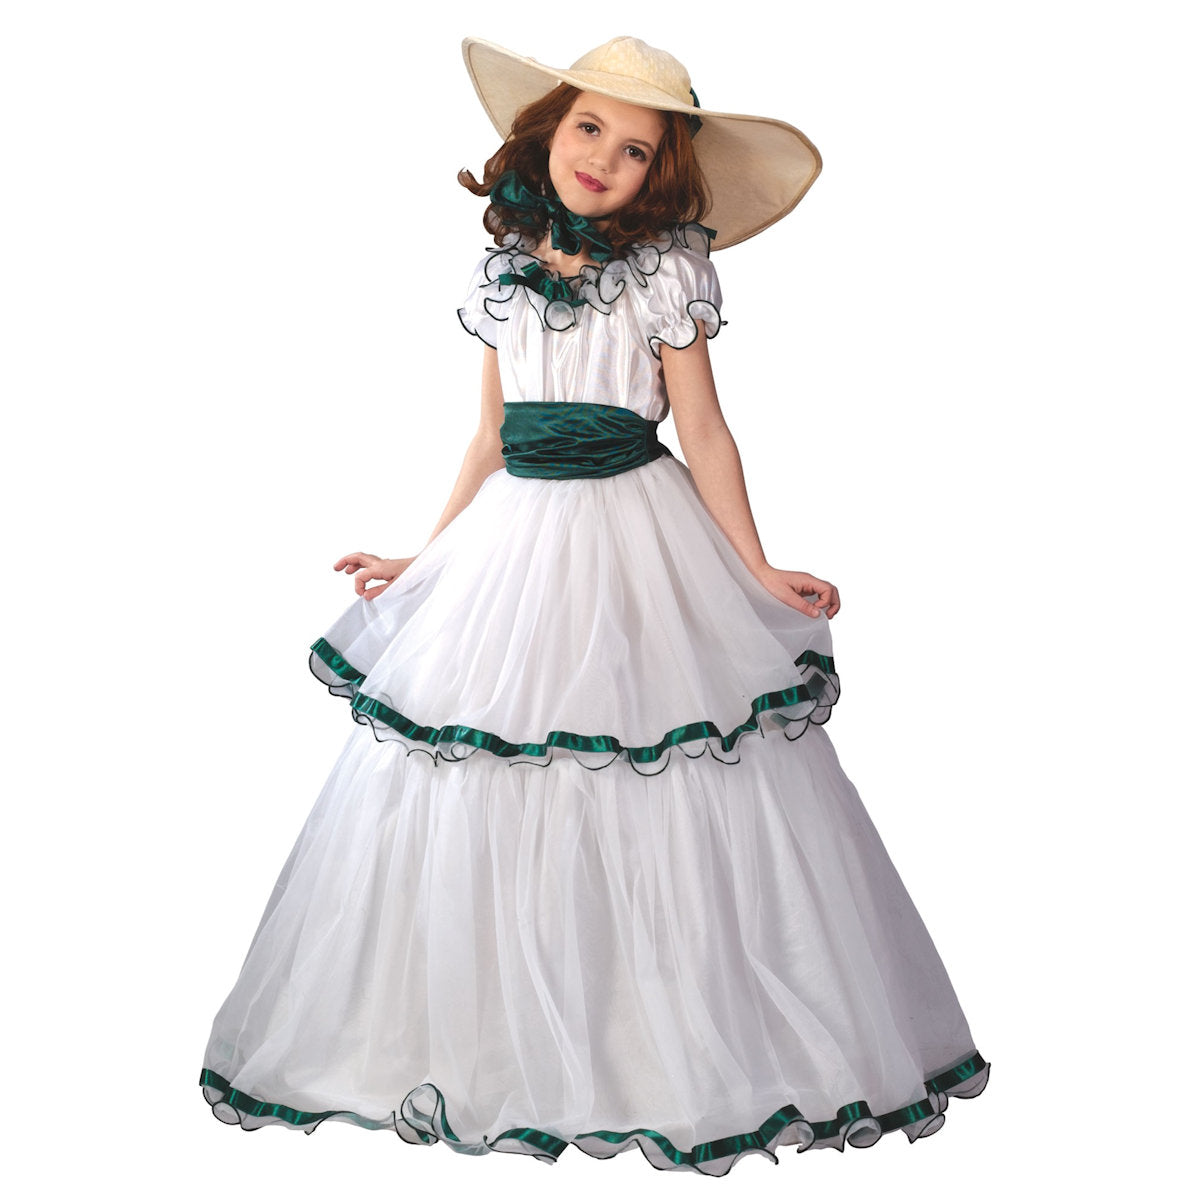 Southern Belle Scarlet O'Hara Gone with the Wind Girls Costume